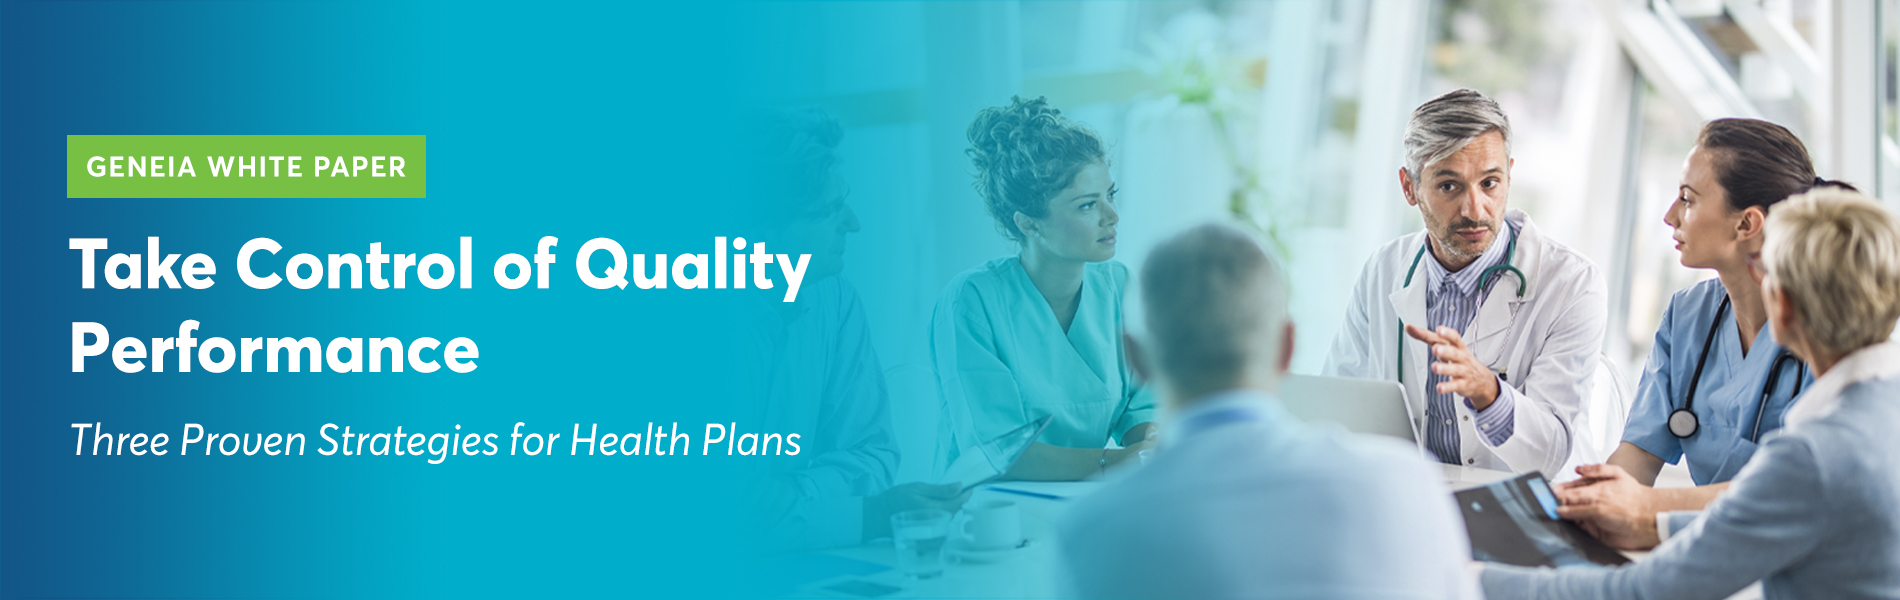 Making Quality Performance Manageable: Three Strategies for Health Plans